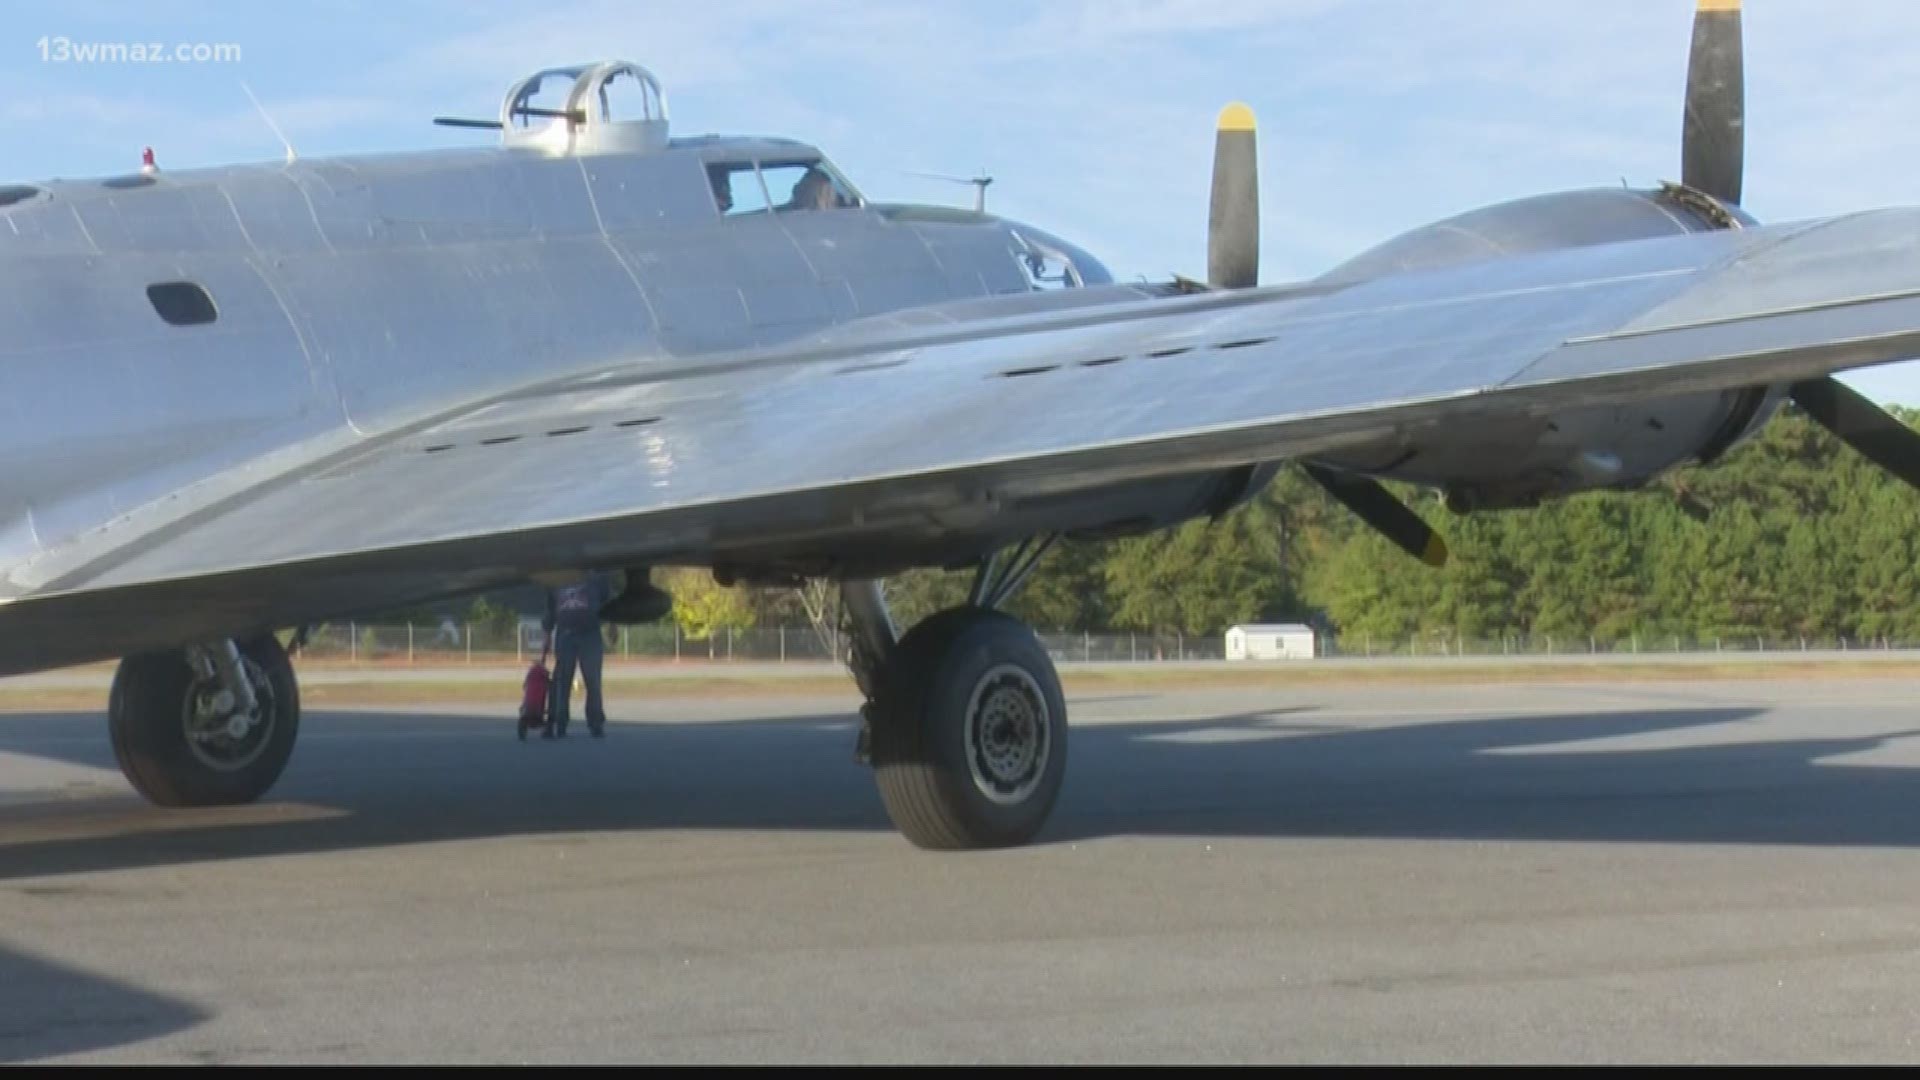 At the Baldwin County Regional Airport, people from all over Central Georgia along with veterans got a chance to climb aboard the B-17 aircraft.